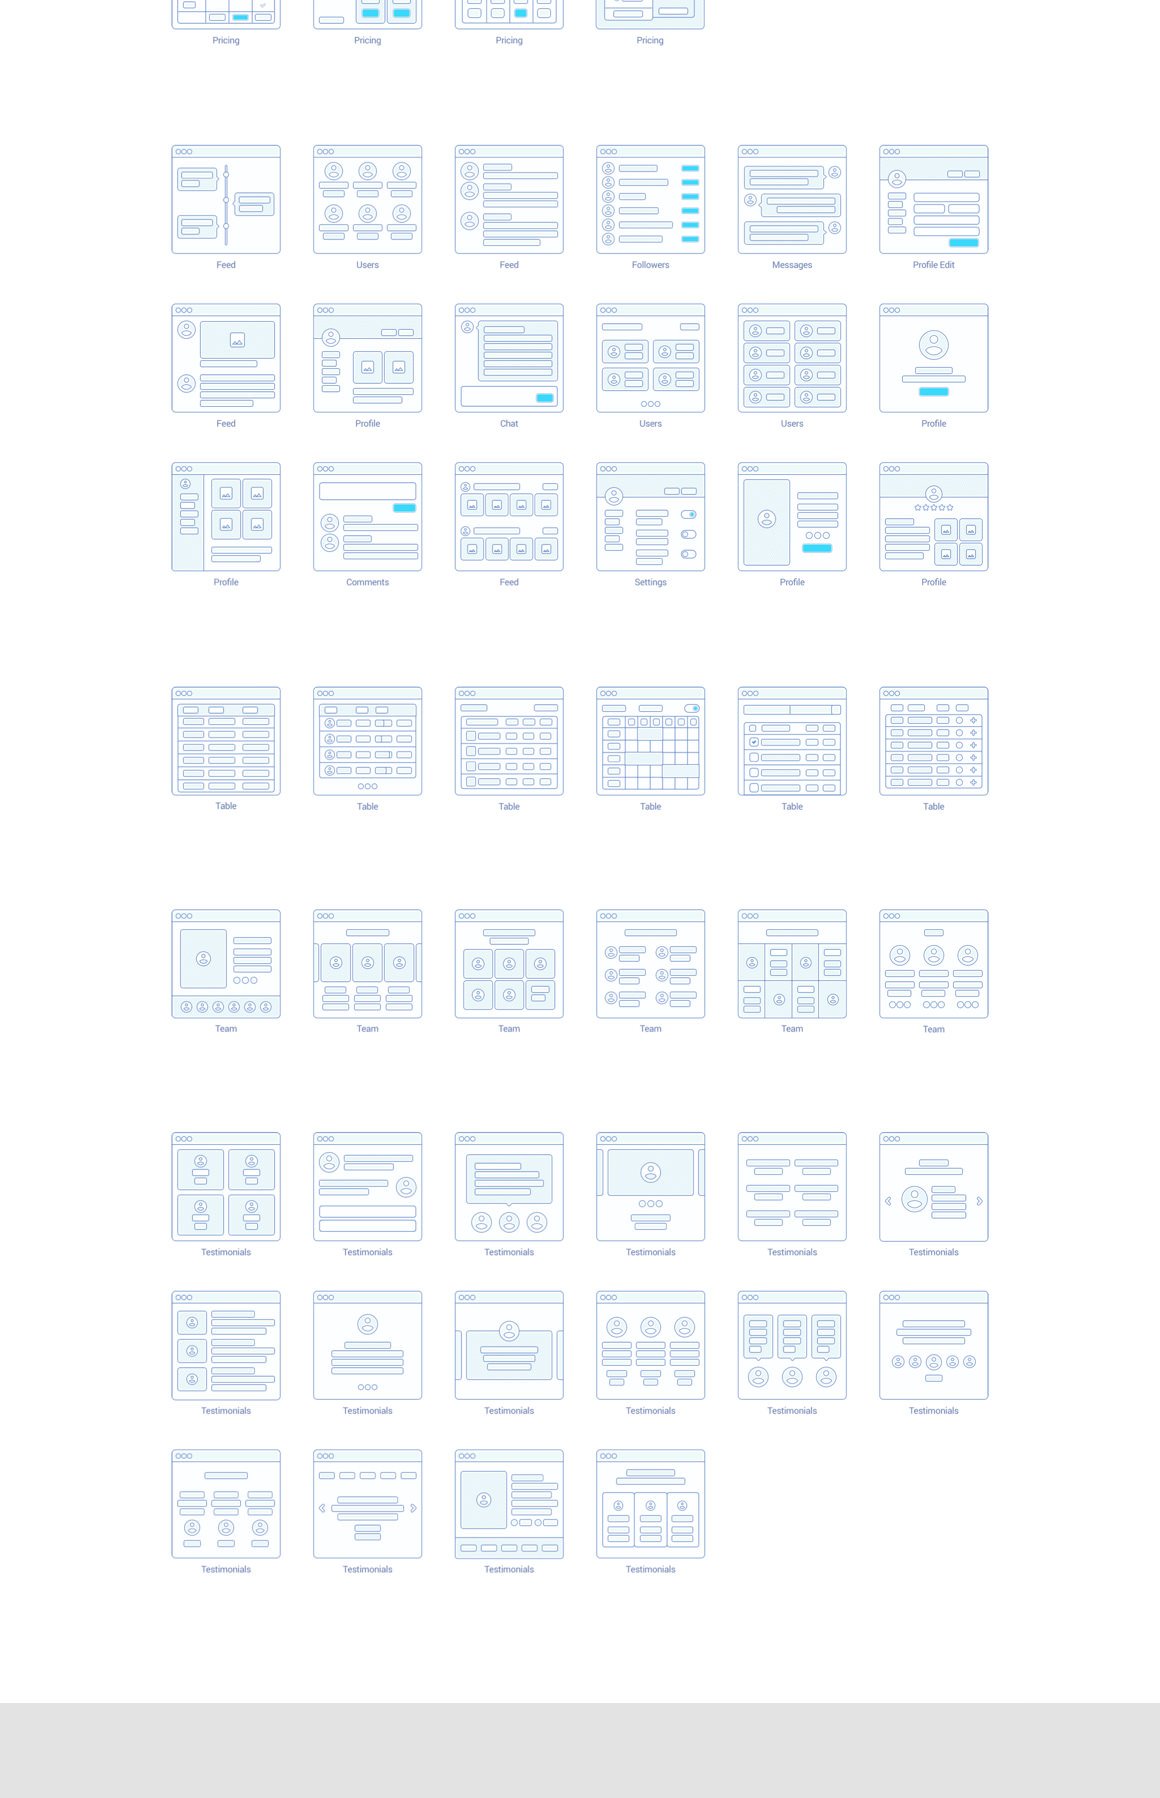 UX Flow, Wireframe Prototyping System